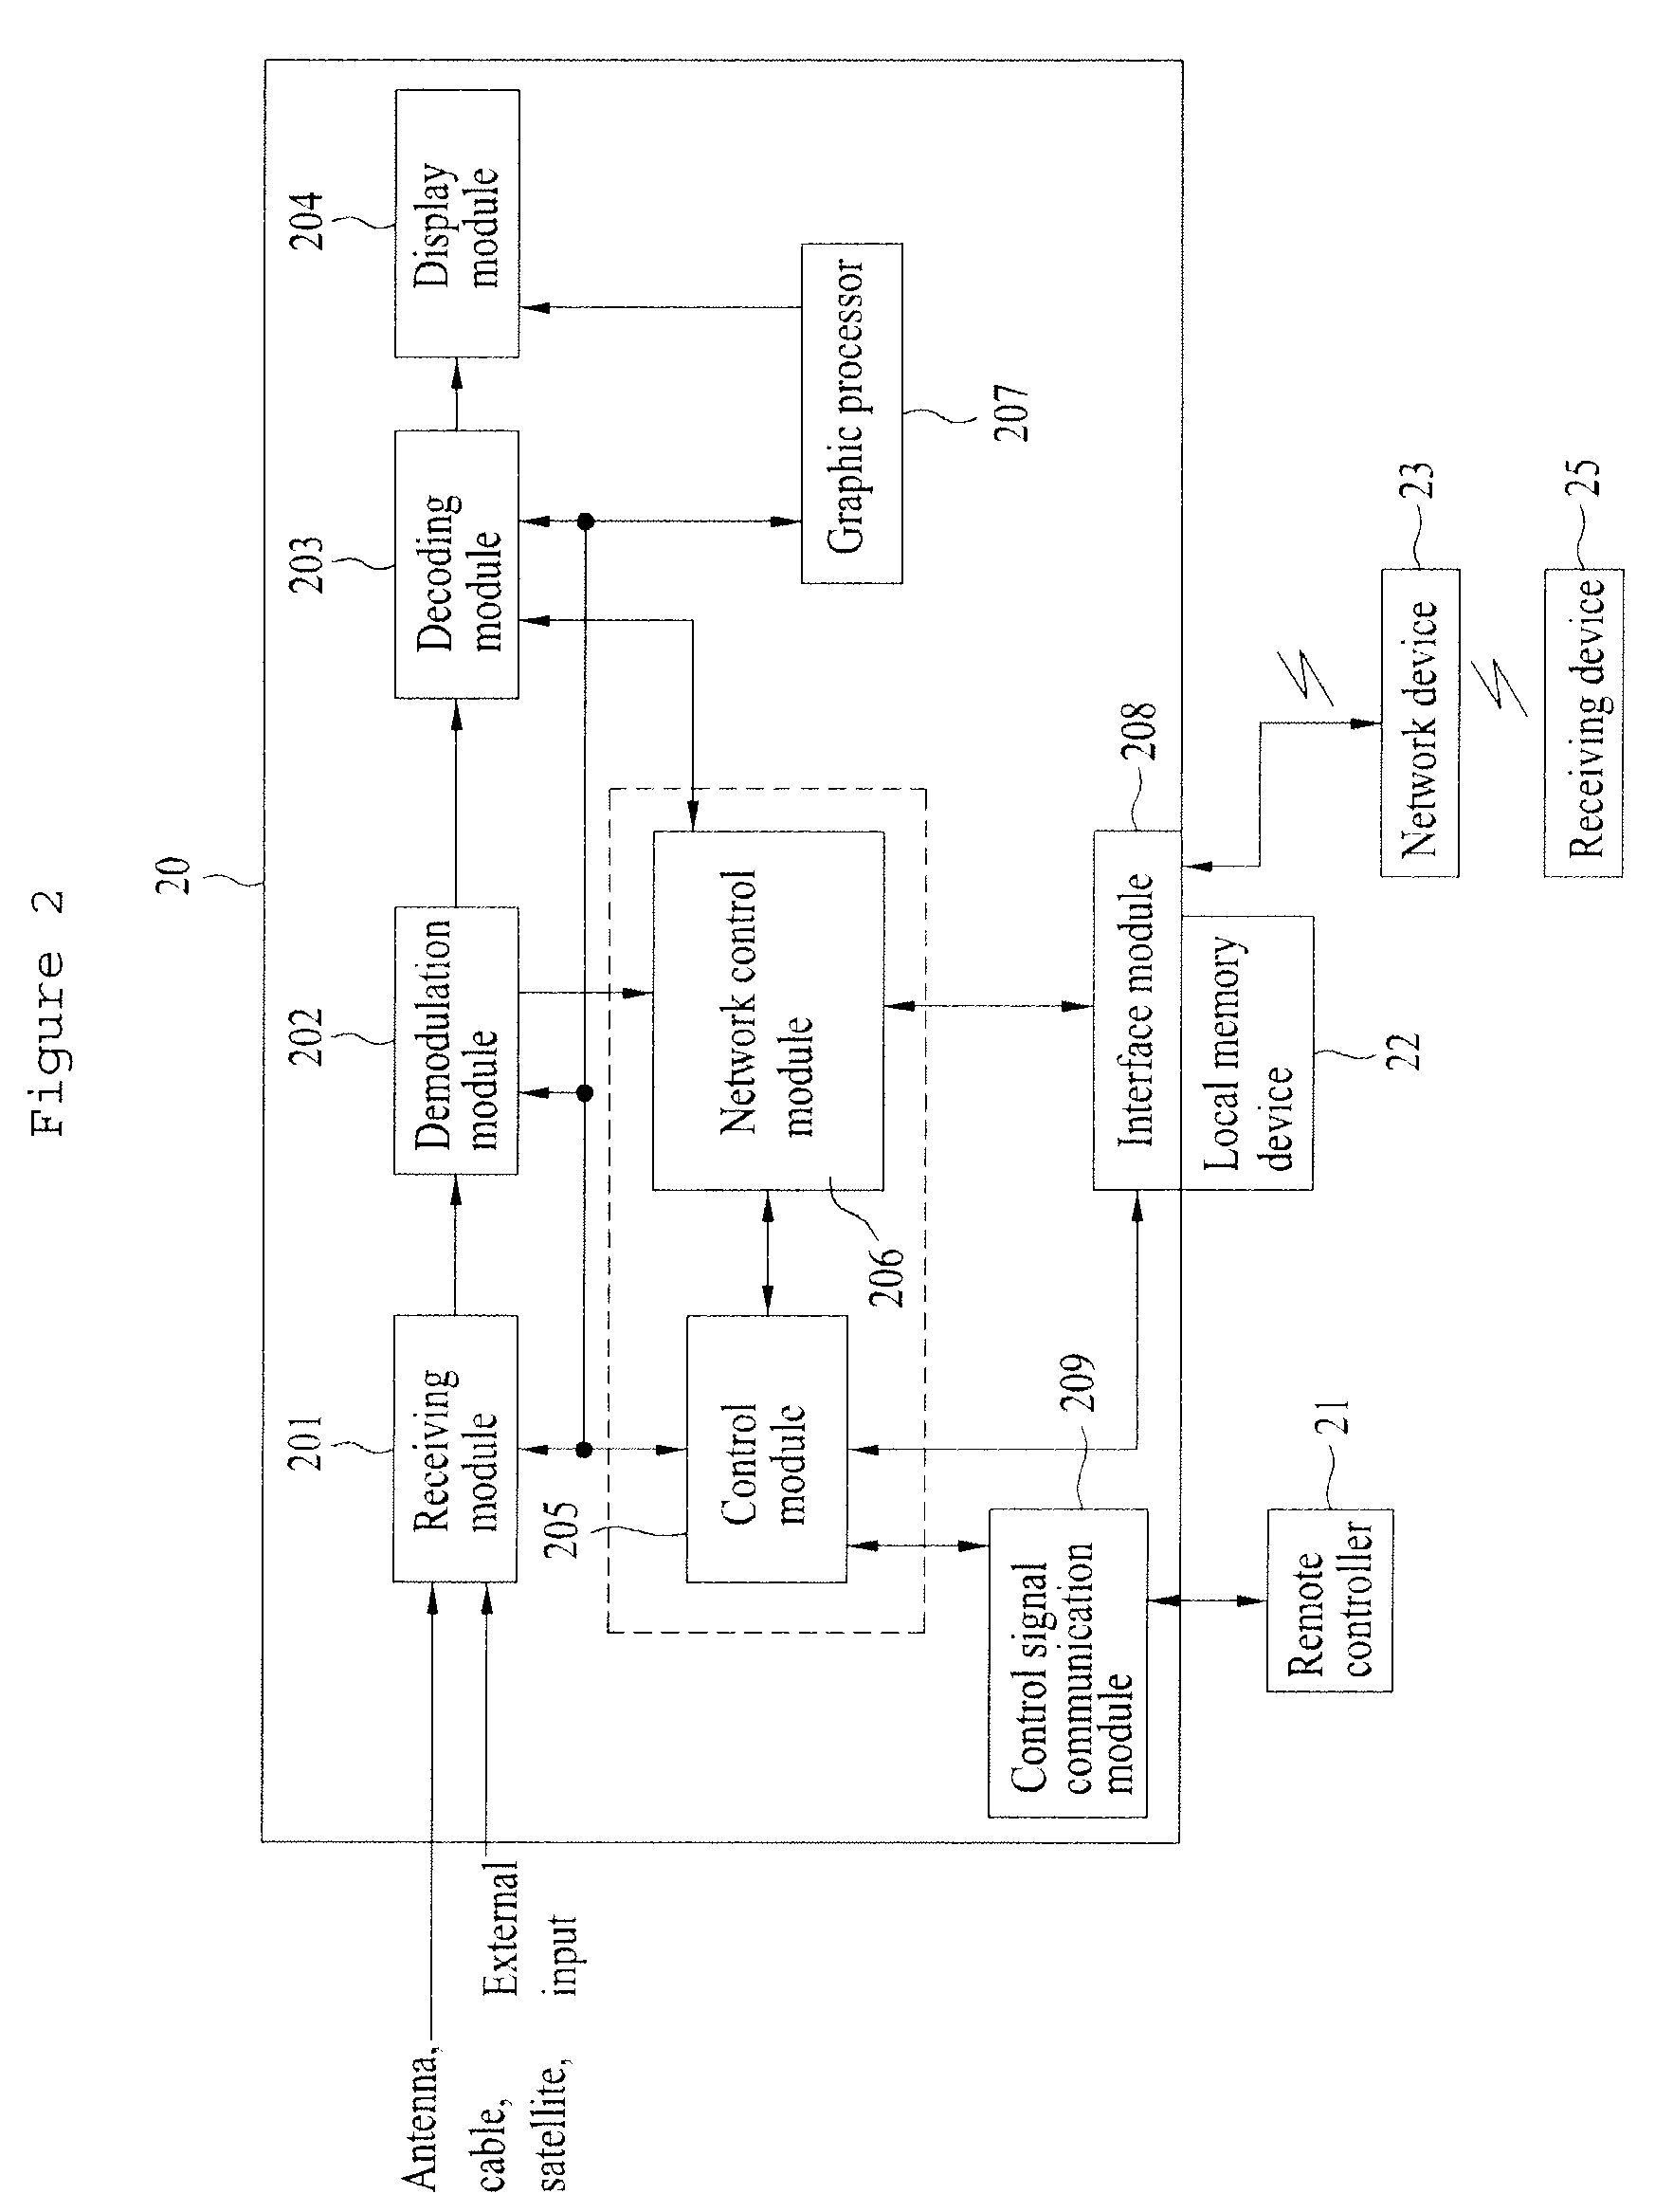 Method of controlling devices and tuner device